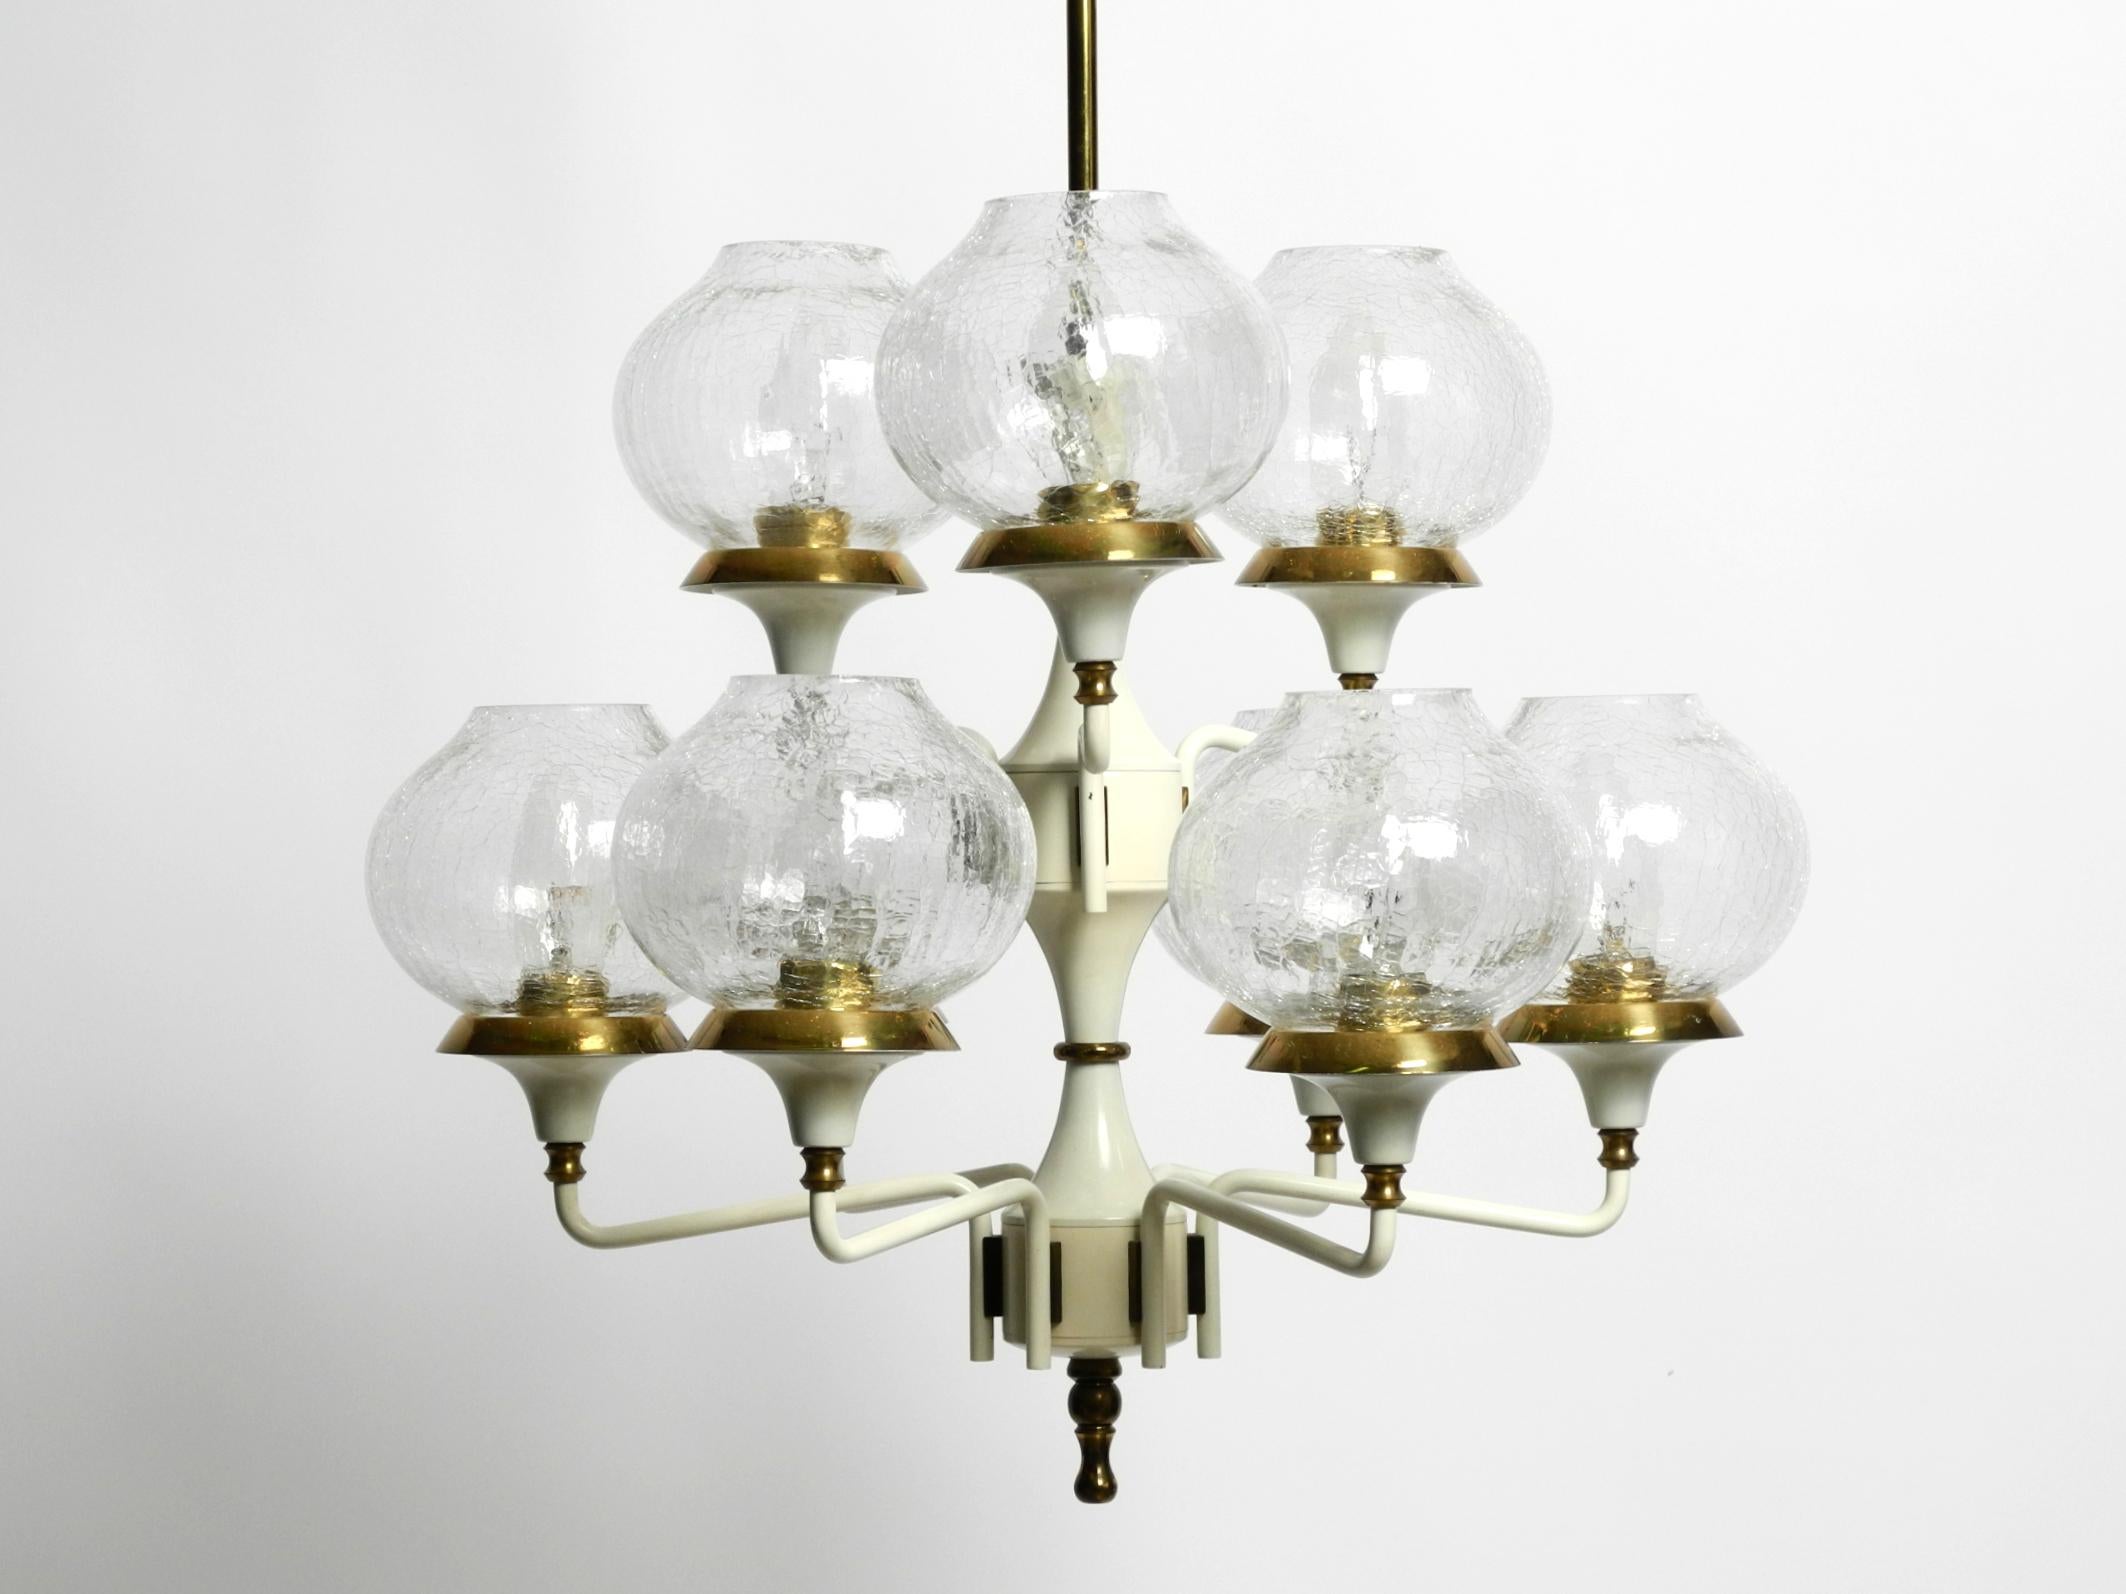 Beautiful 1960s metal and brass ceiling lamp with 9 arms.
Designed by Hans Agne Jakobsson. Manufacturer is Markaryd. Made in Sweden.
The frame is made of metal painted in white. The brackets, rod and canopy are made of brass.
Elegant design. Very